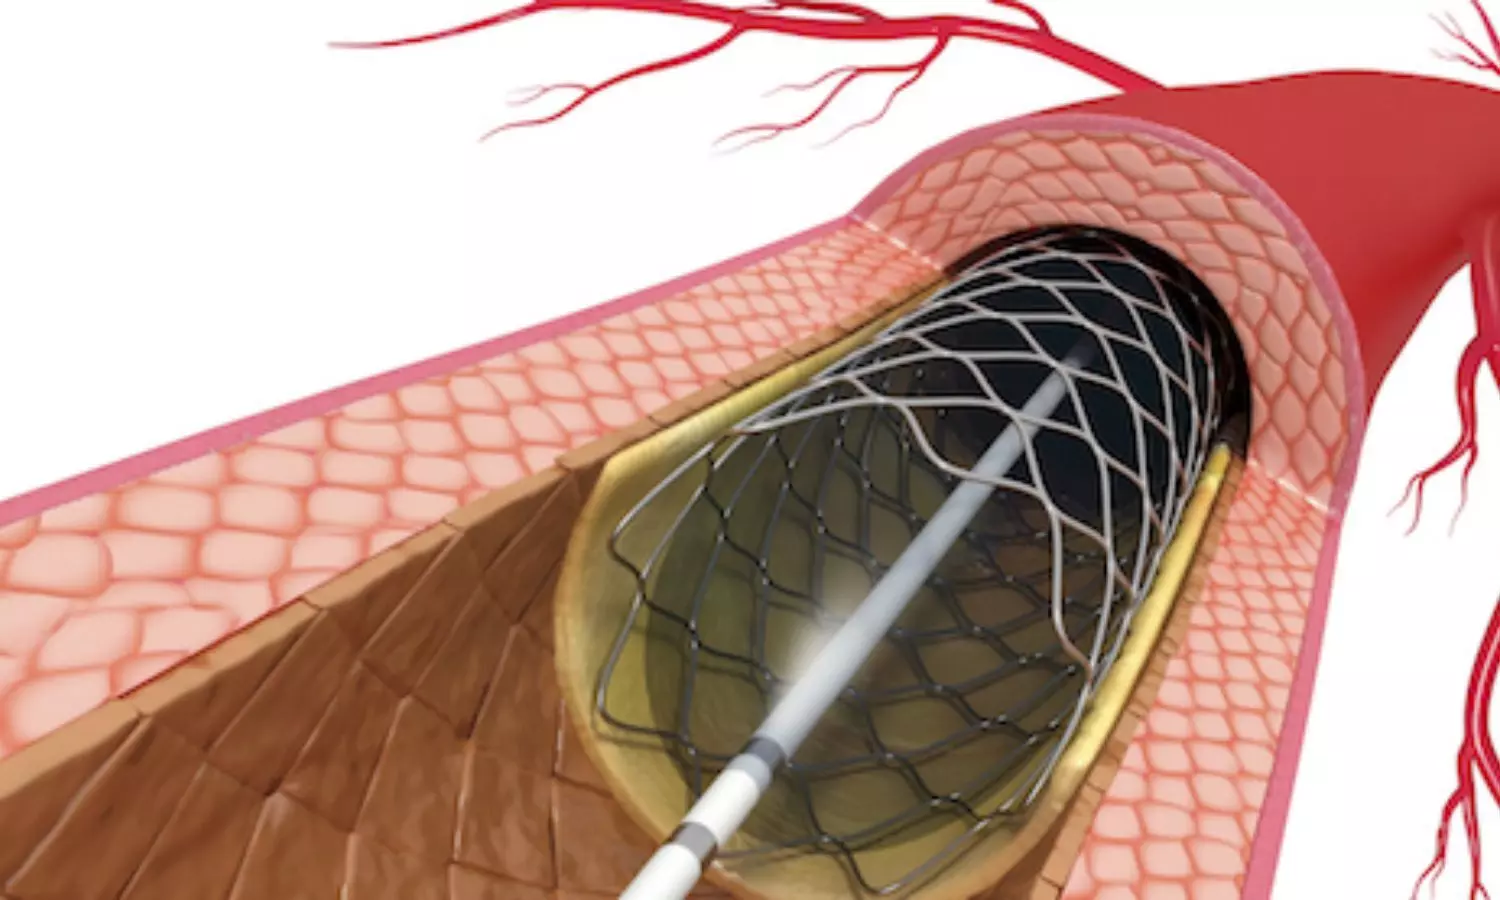 Lower mortality rates seen with pharmaco-invasive strategy than late primary PCI in STEMI patients